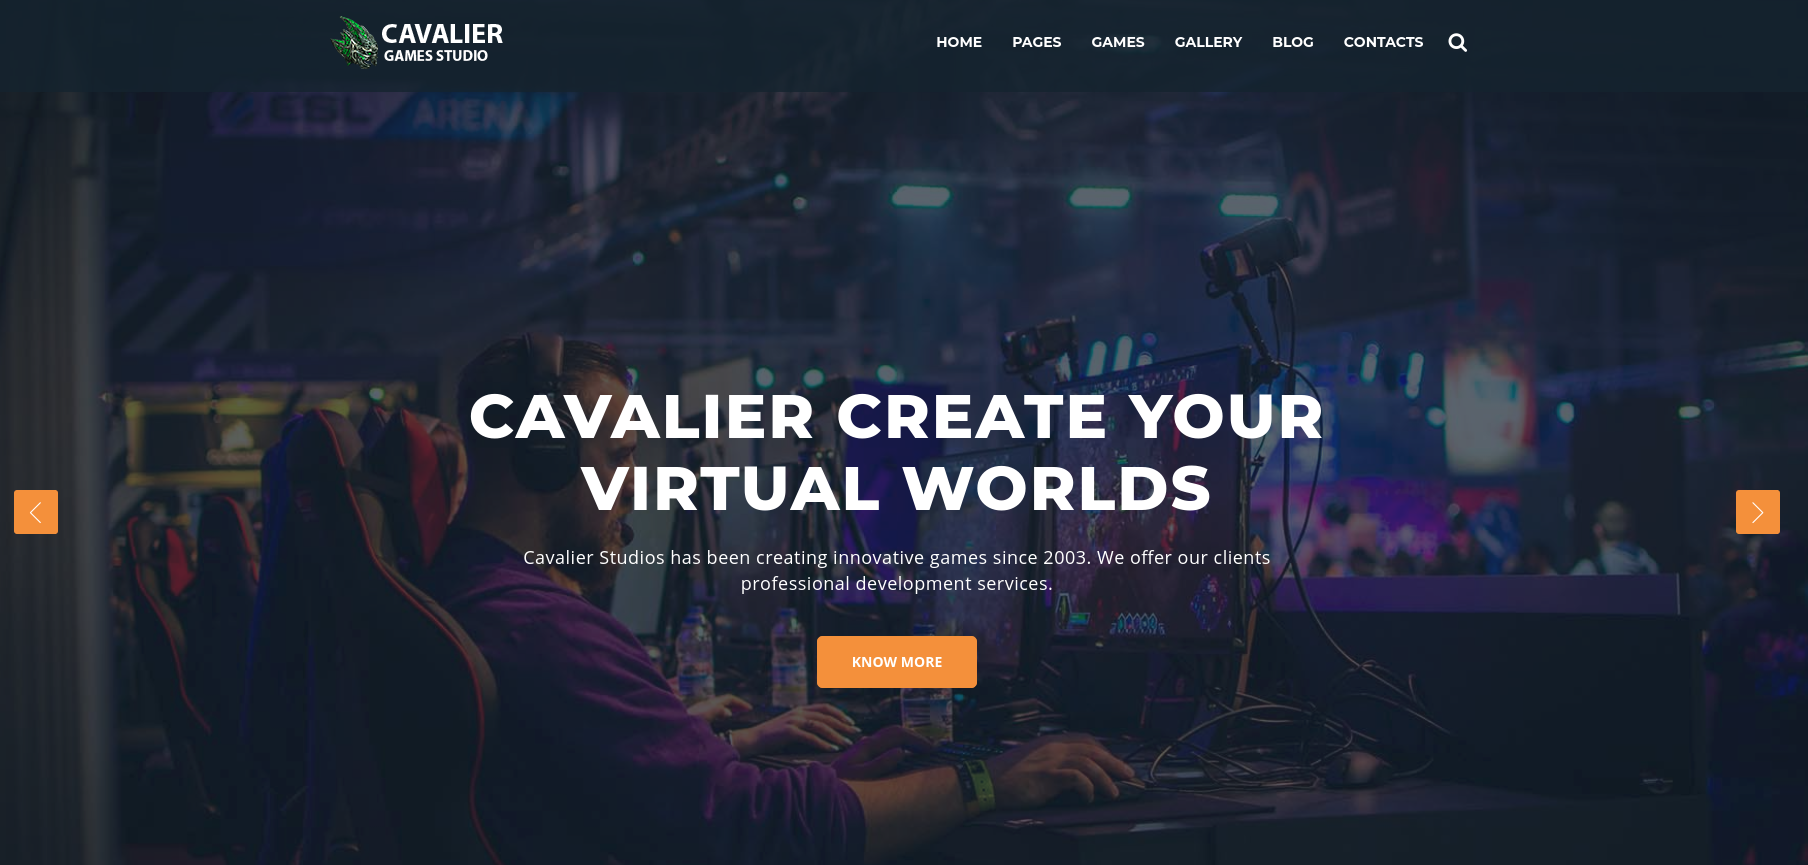 Top Resources tagged as gaming website template